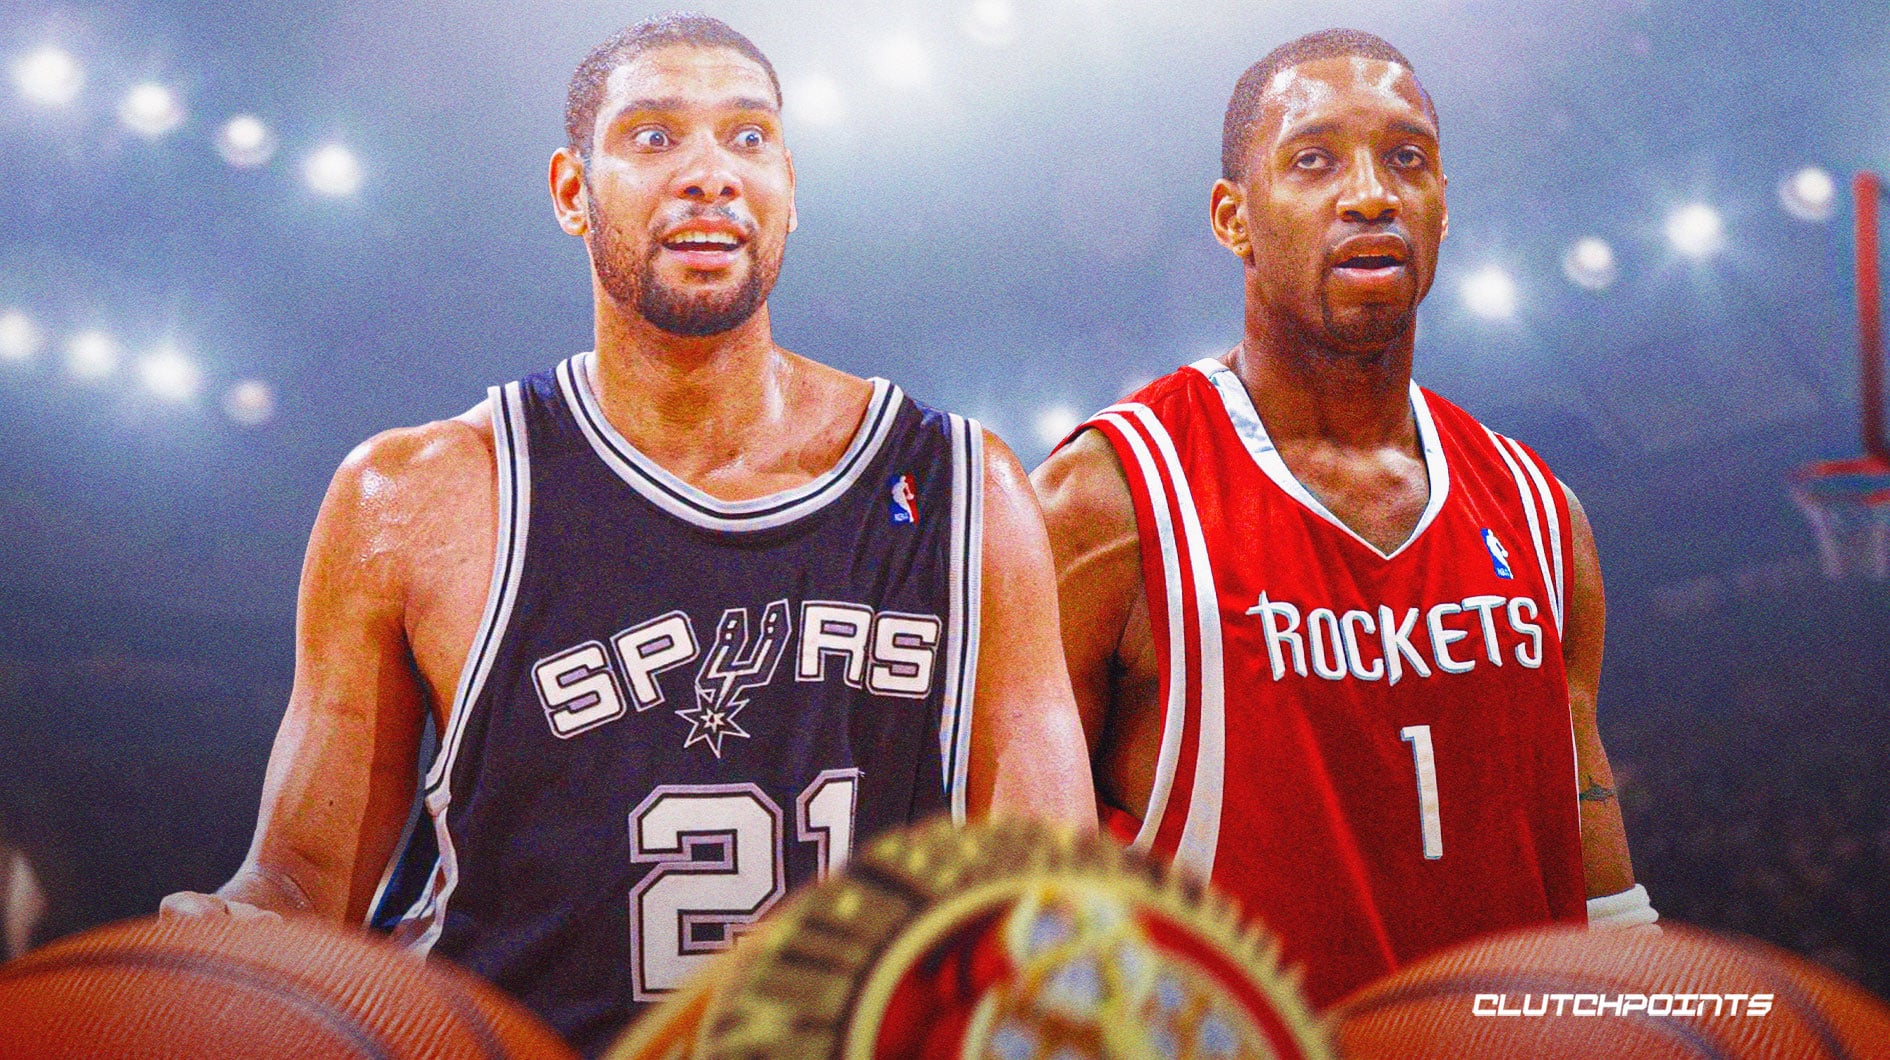 McGrady to the Hall of Fame? - Forward Times